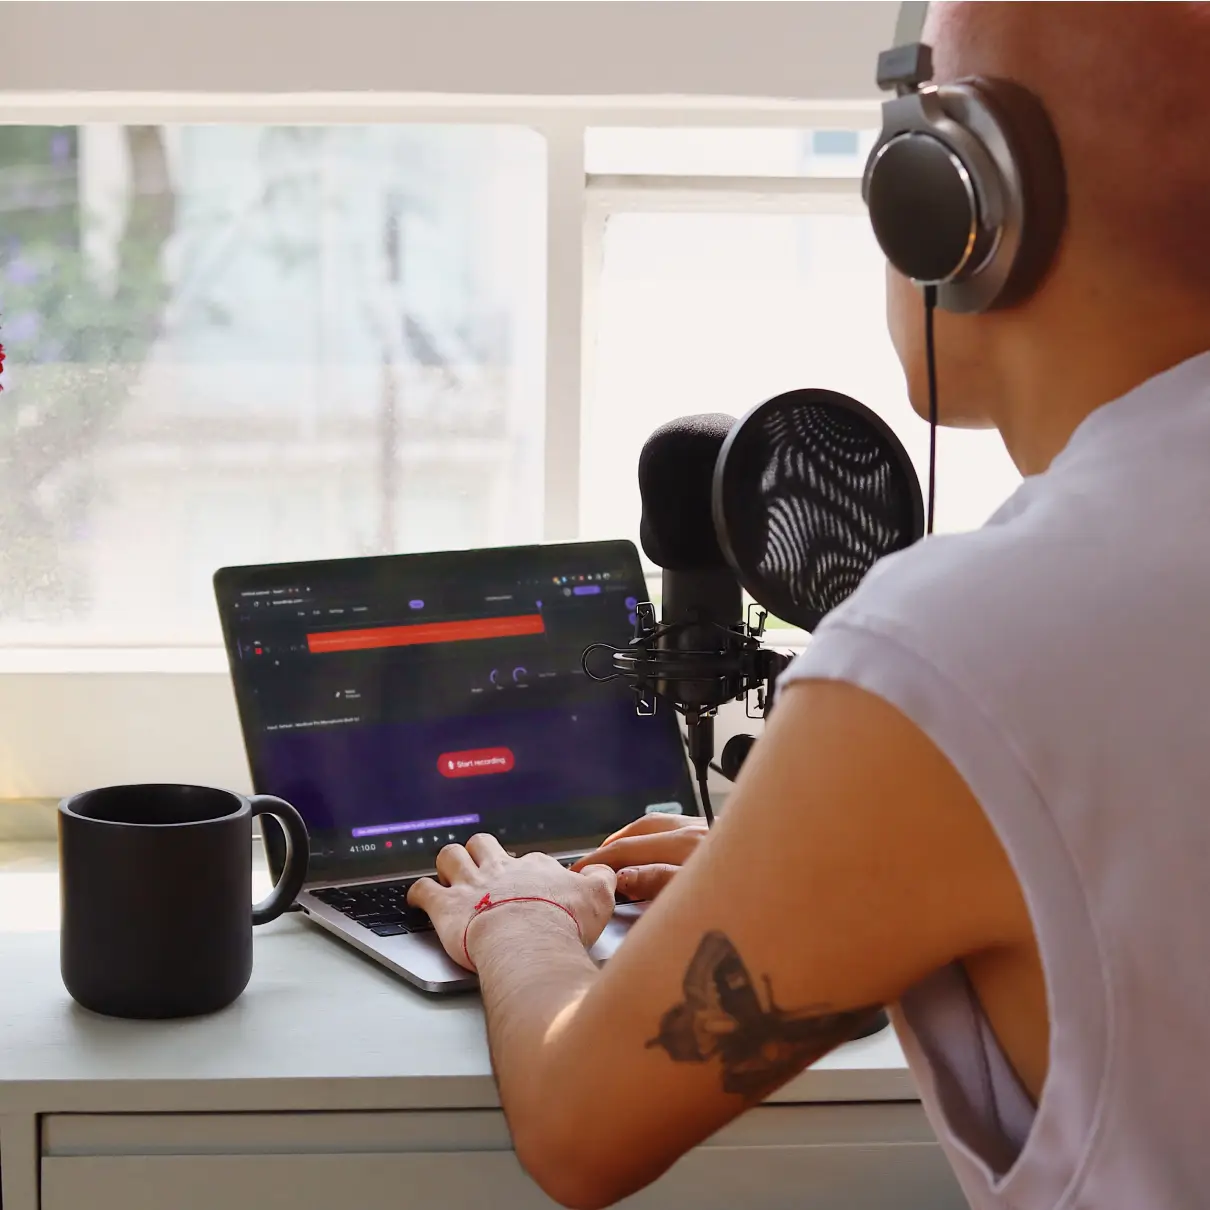 The back of someone who is looking at a screen with the Soundtrap Studio in dark mode on. They have a coffee cup beside them, and a microphone in front of them. The person is wearing headphones.